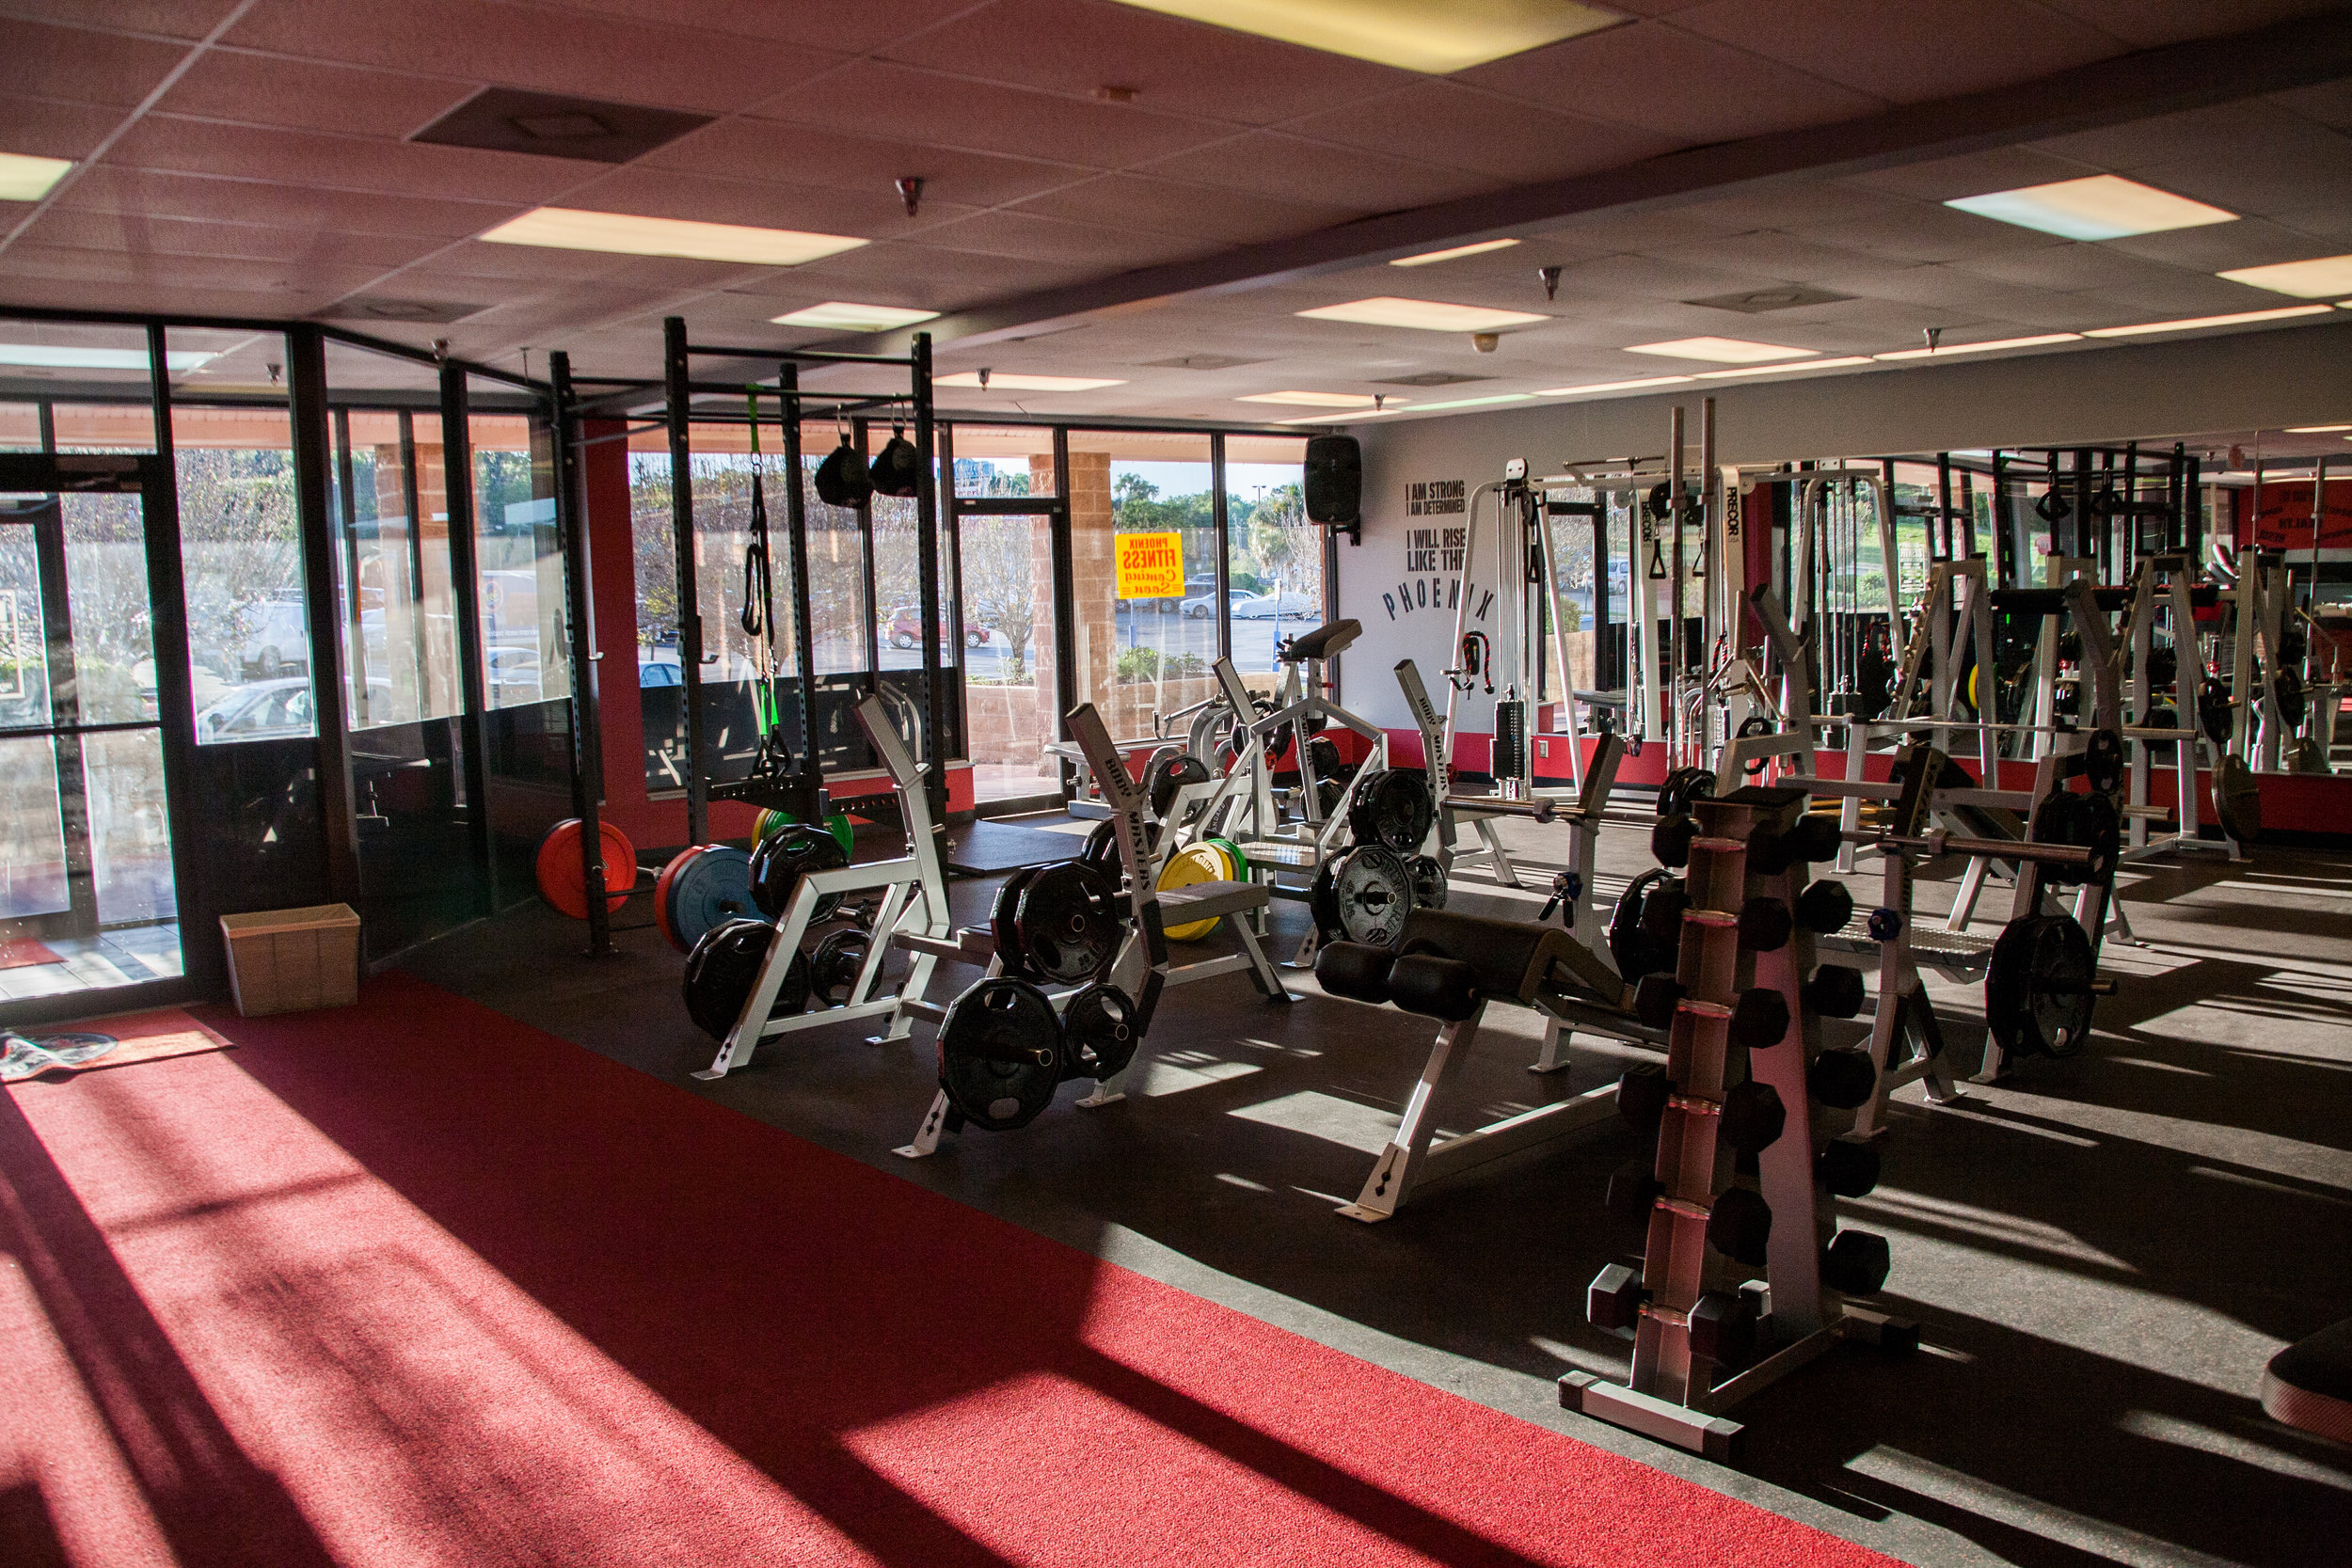  A CLEAN, WELL LIT FACILITY FILLED WITH   high quality equipment    check it out  